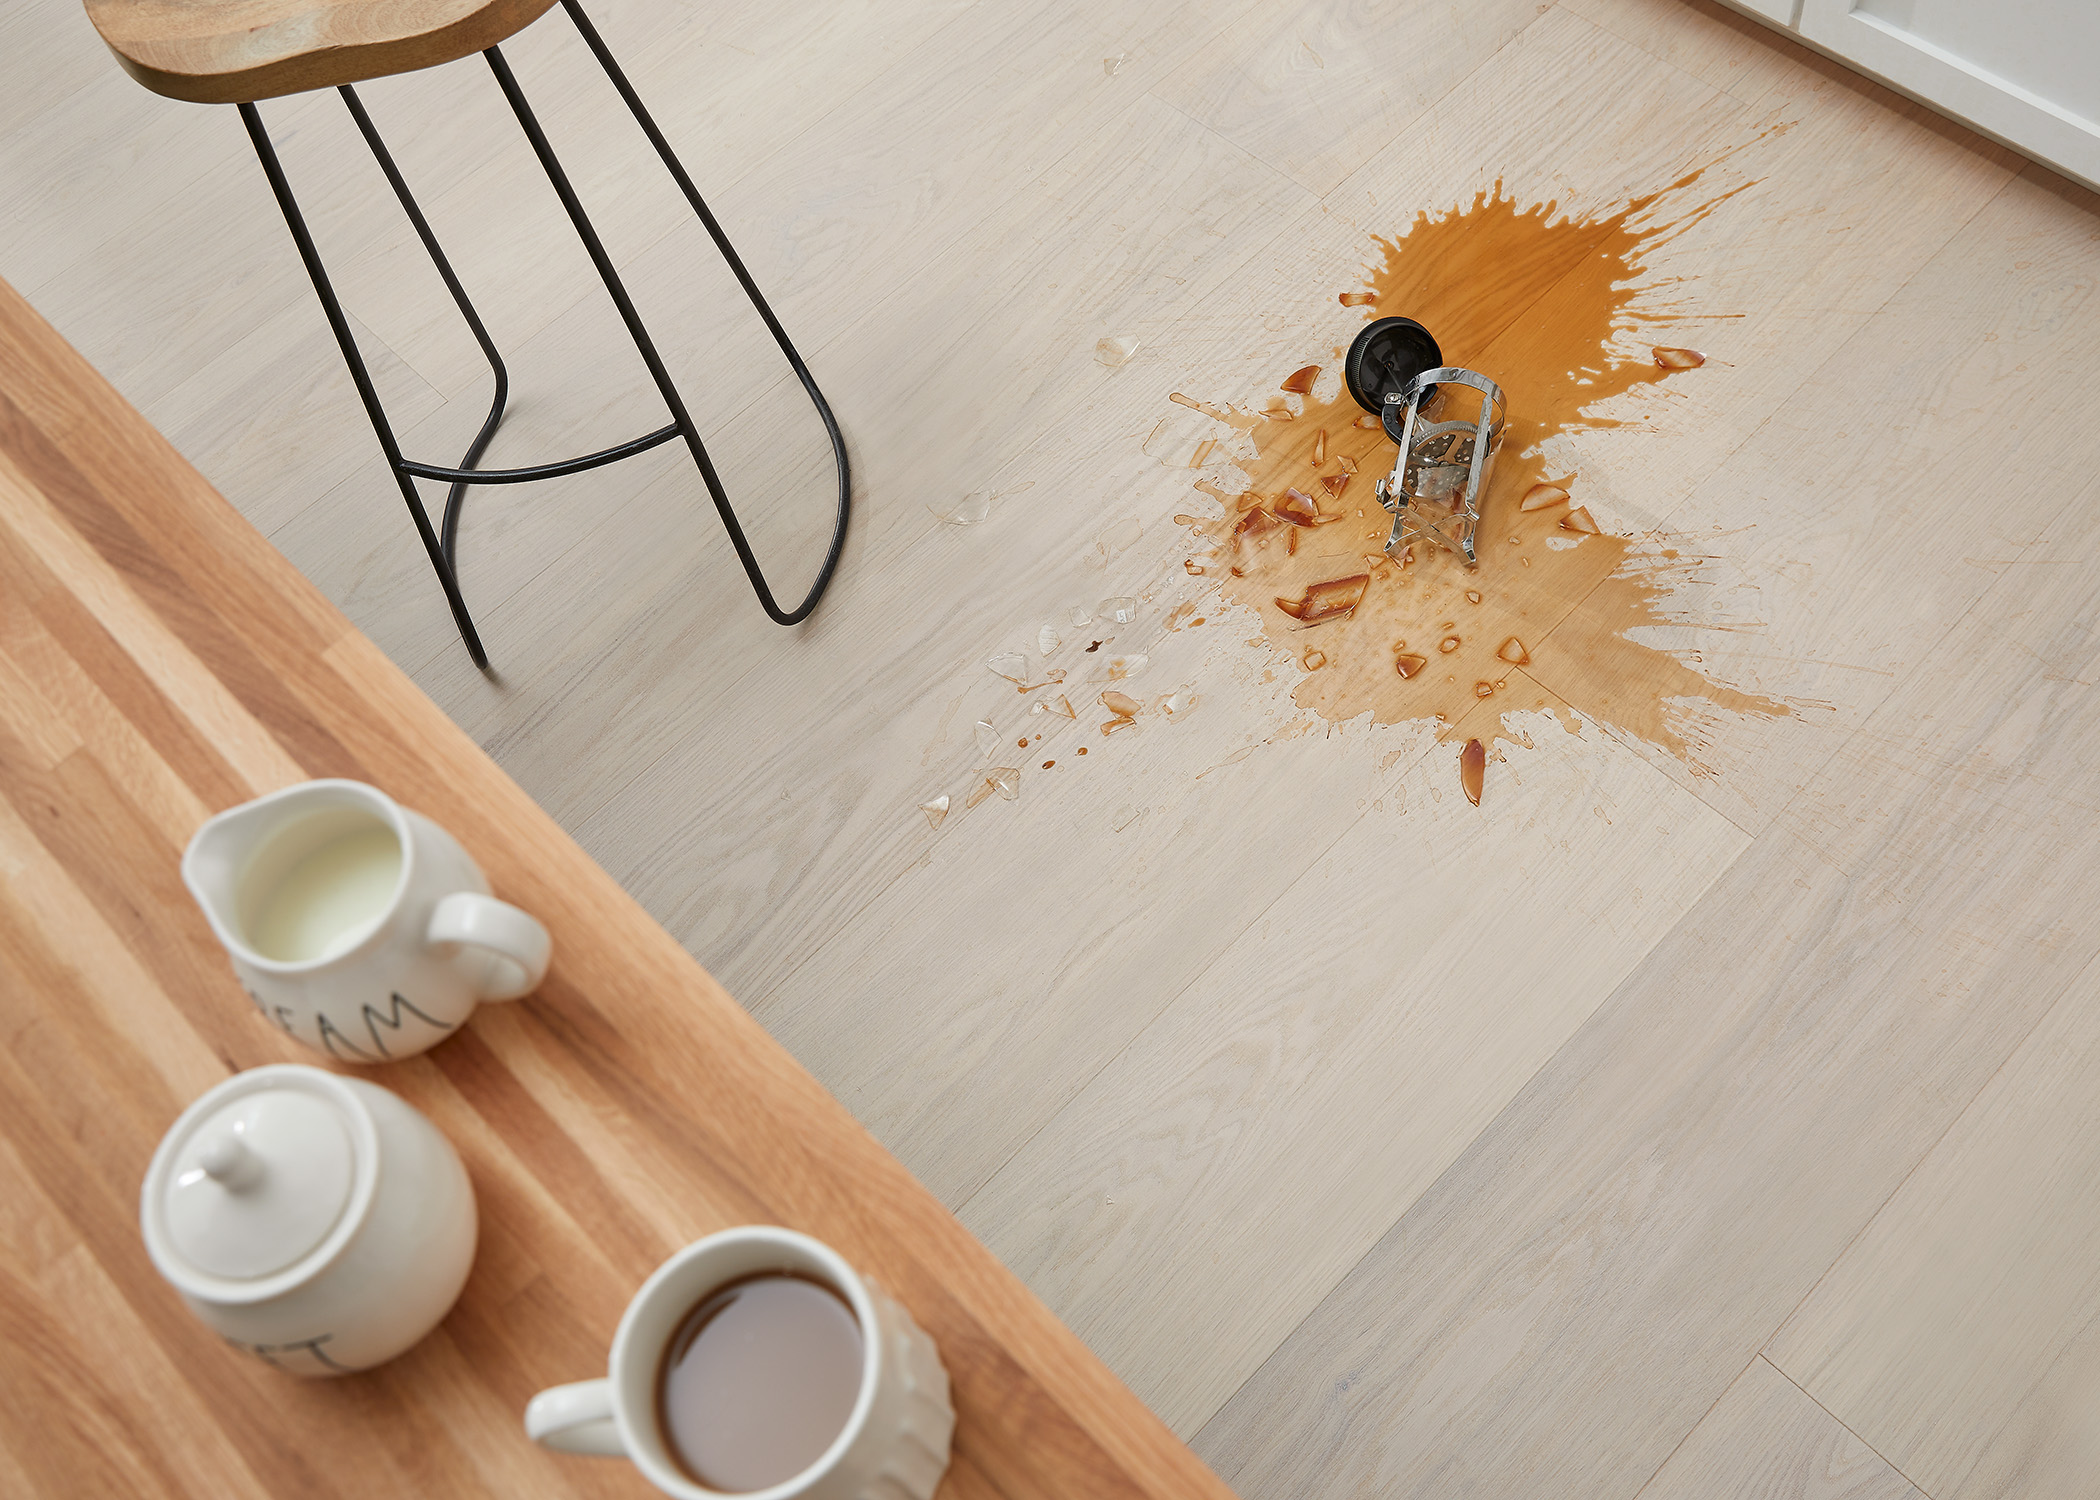 white washed water resistant engineered hardwood floor in kitchen with spilled coffee on floor and broken French press